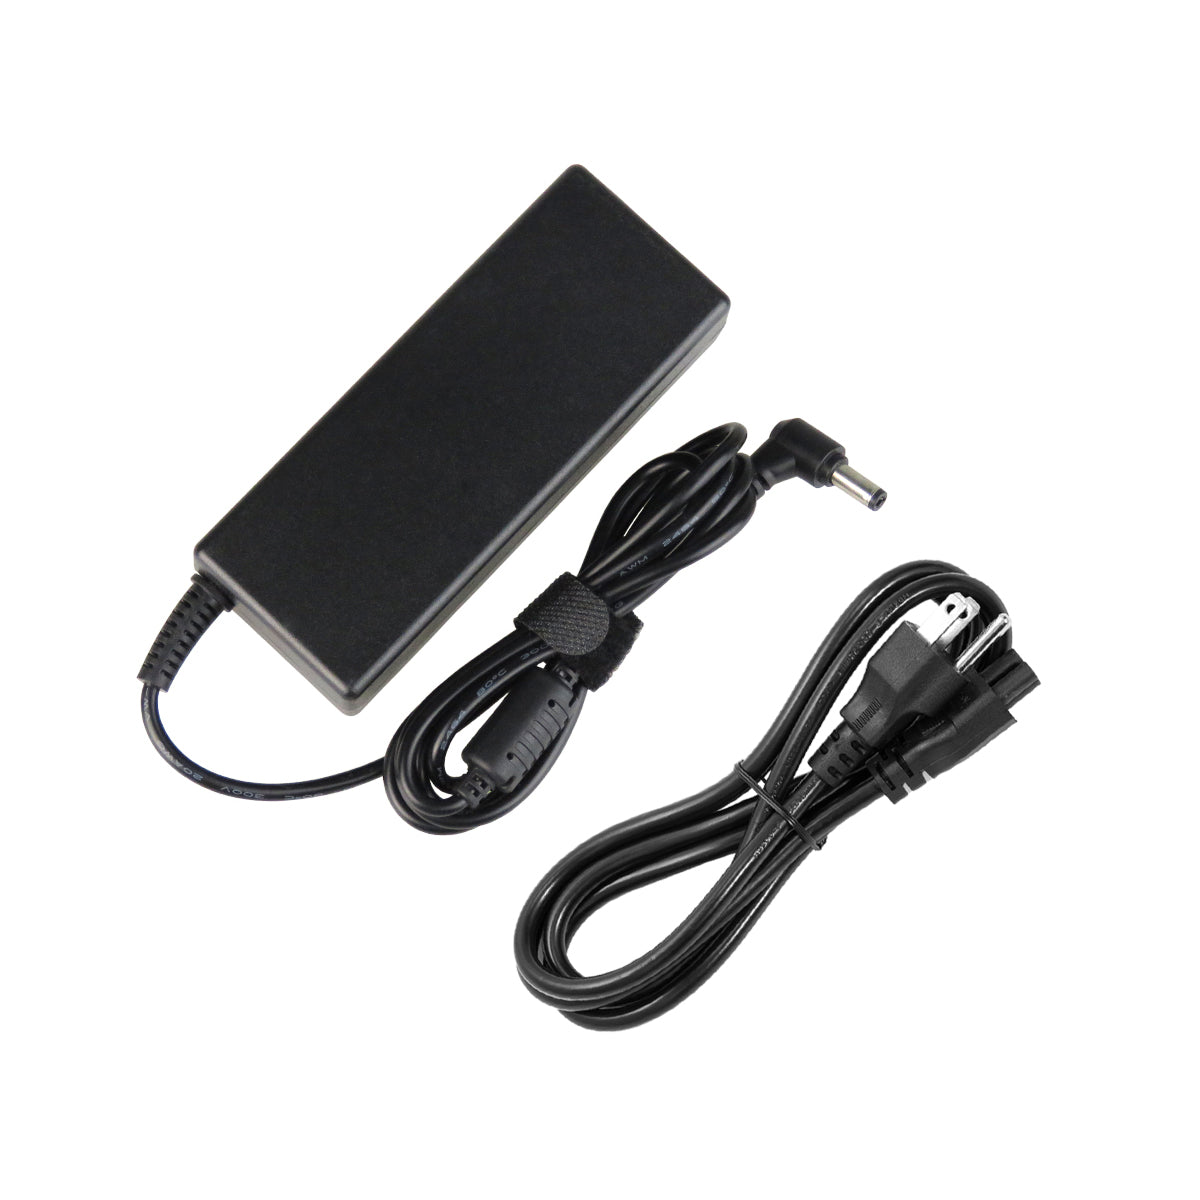 AC Adapter Charger for ASUS N81De Notebook.